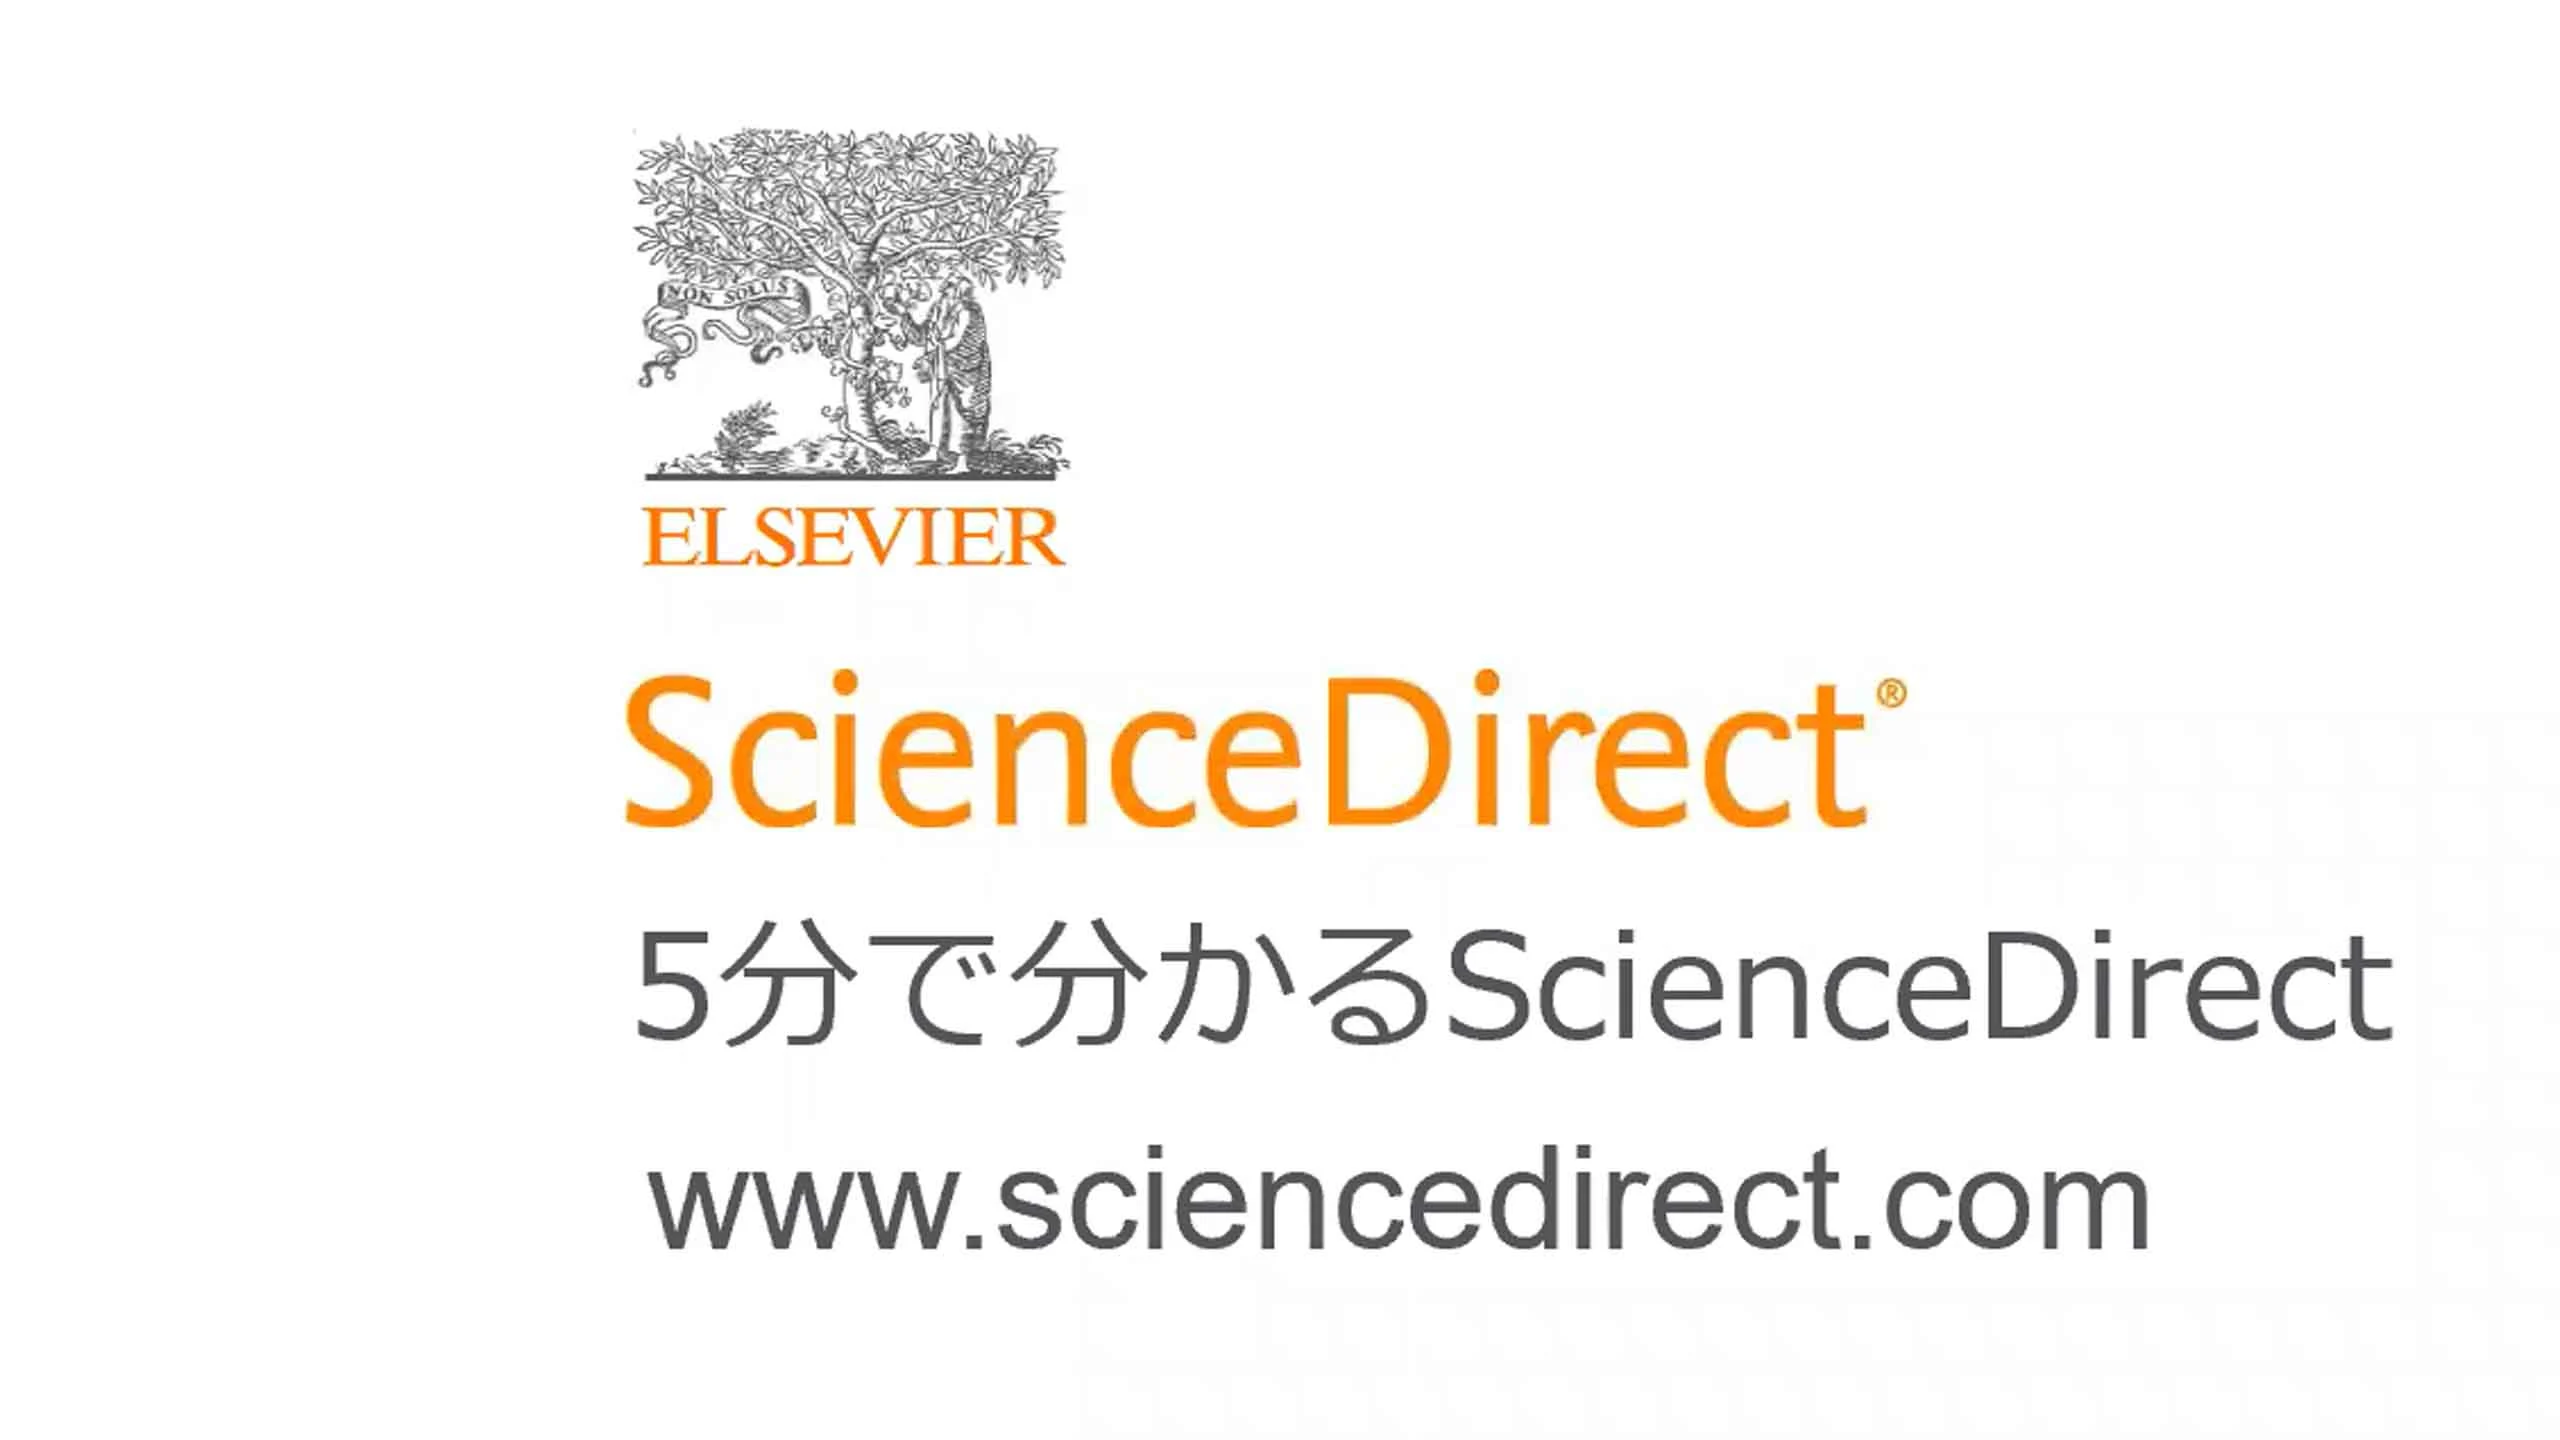 ScienceDirect introduction